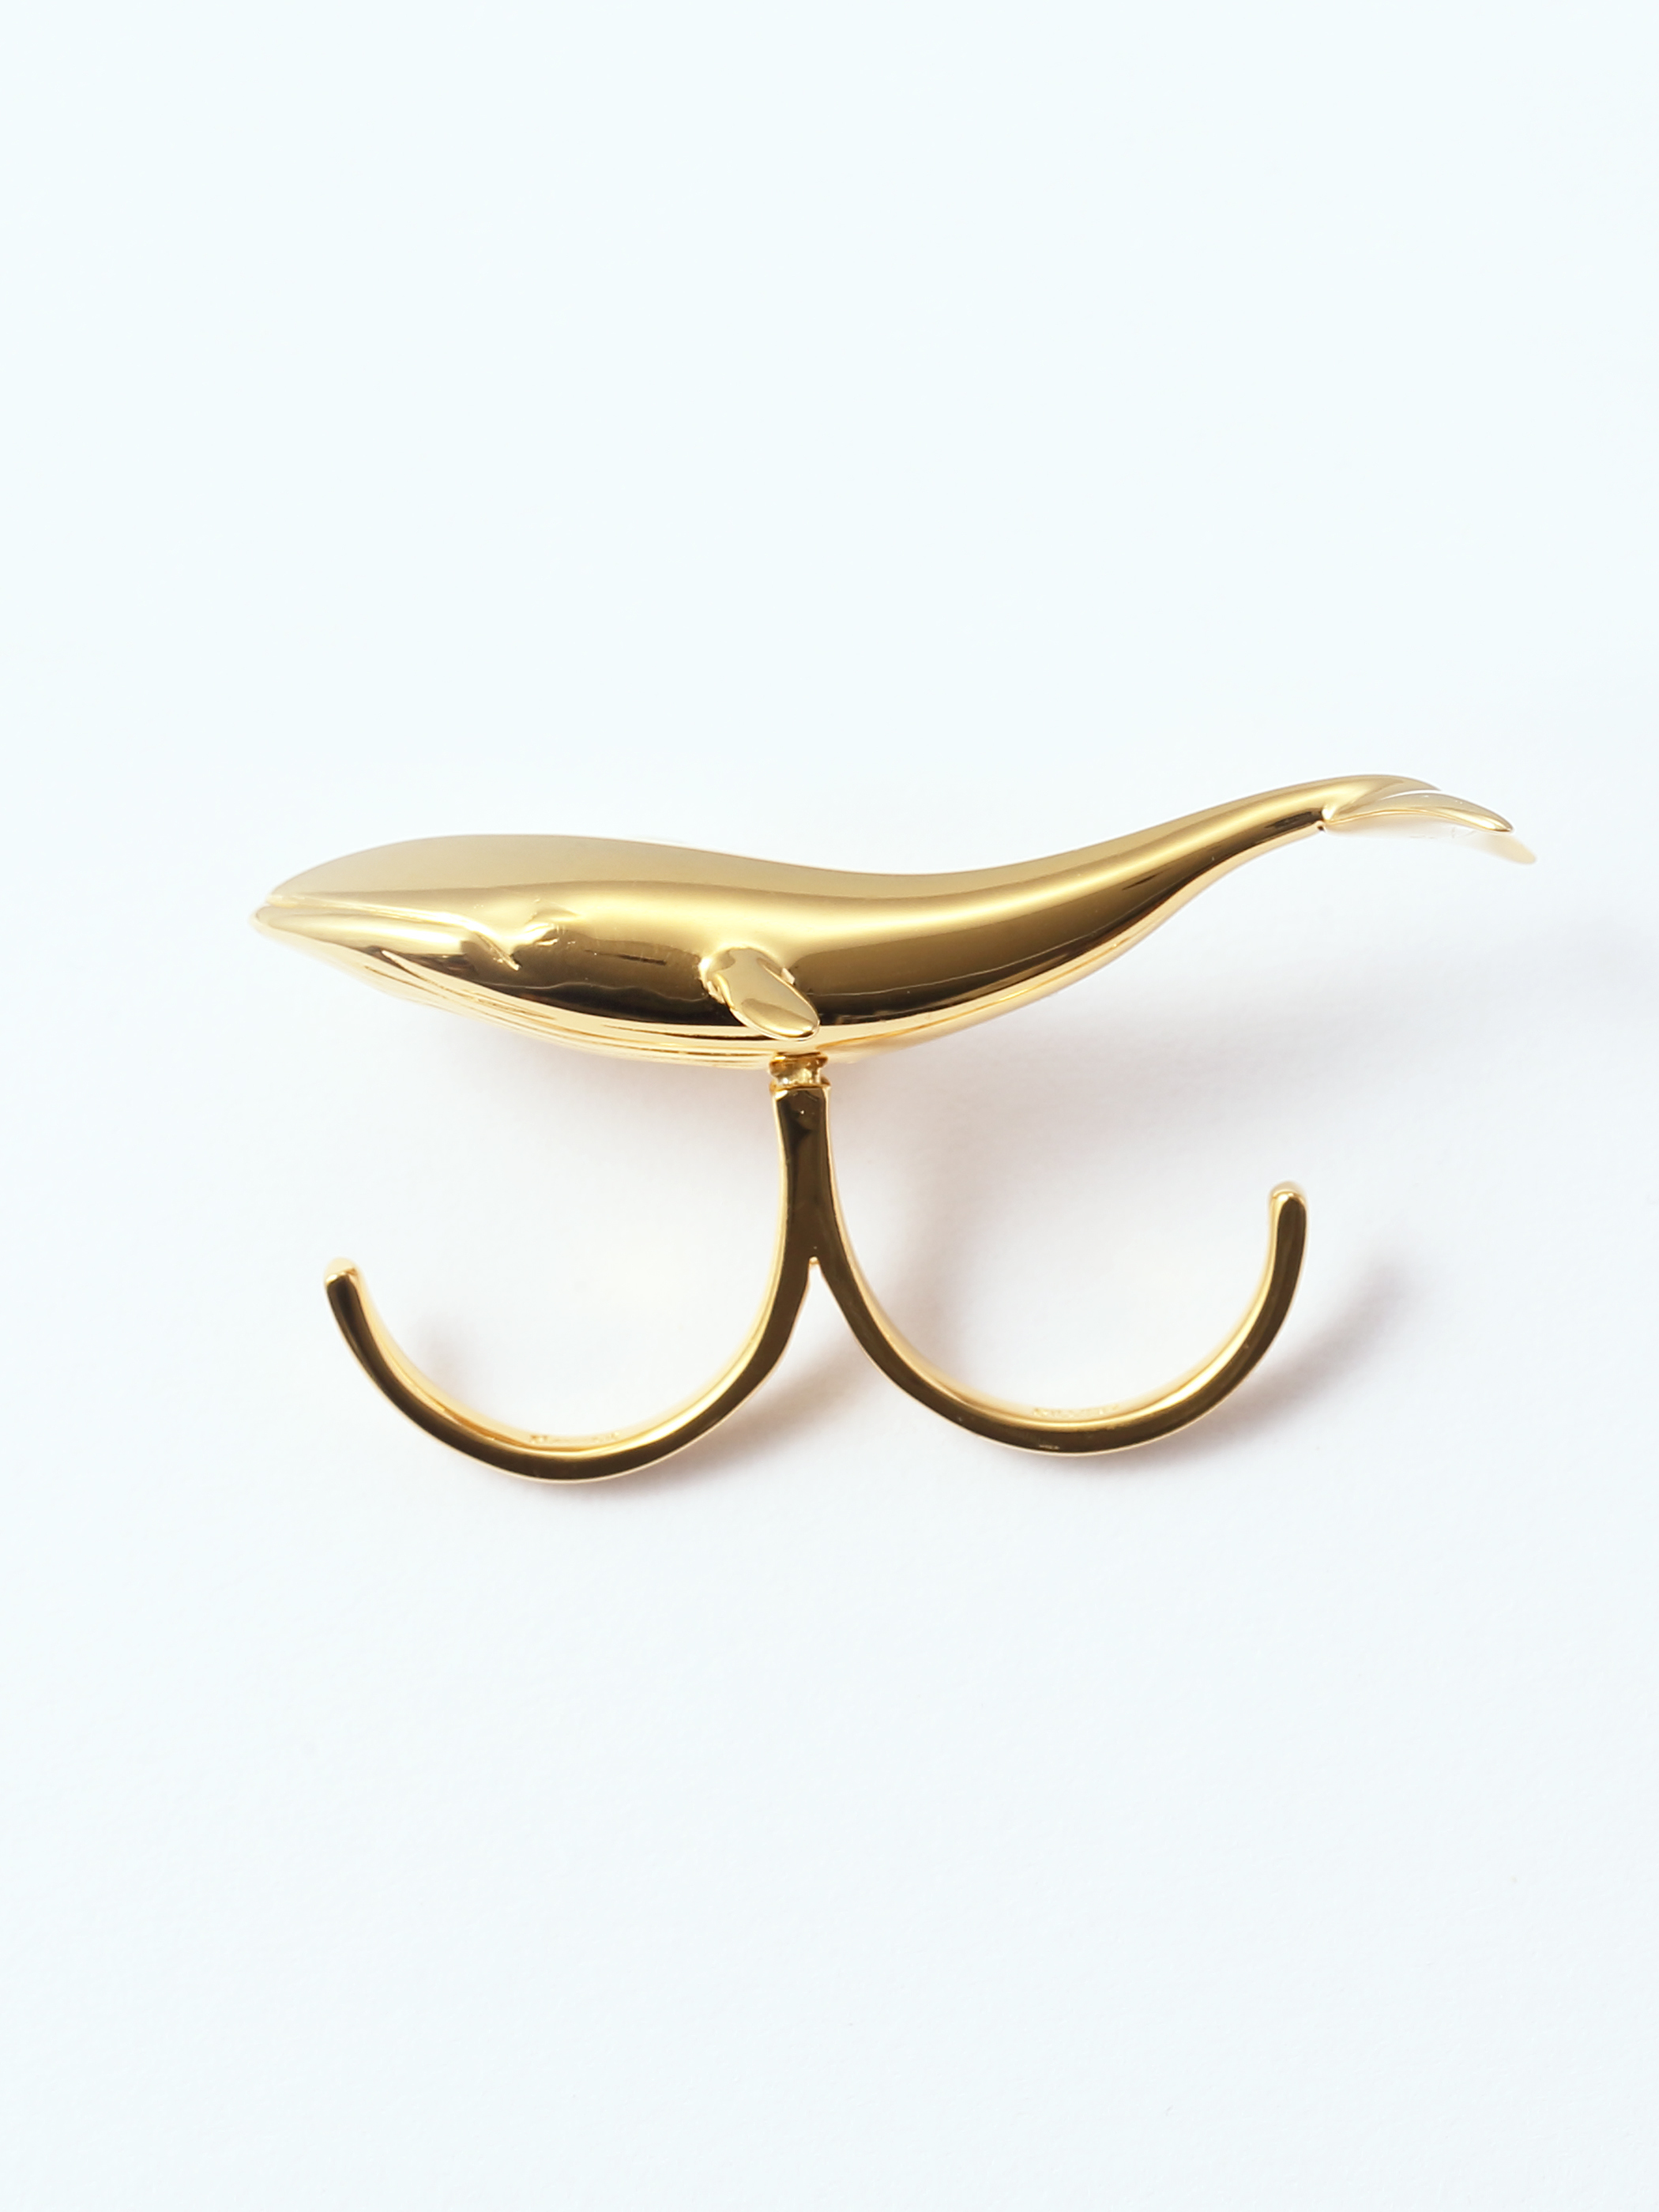 WHALE RING